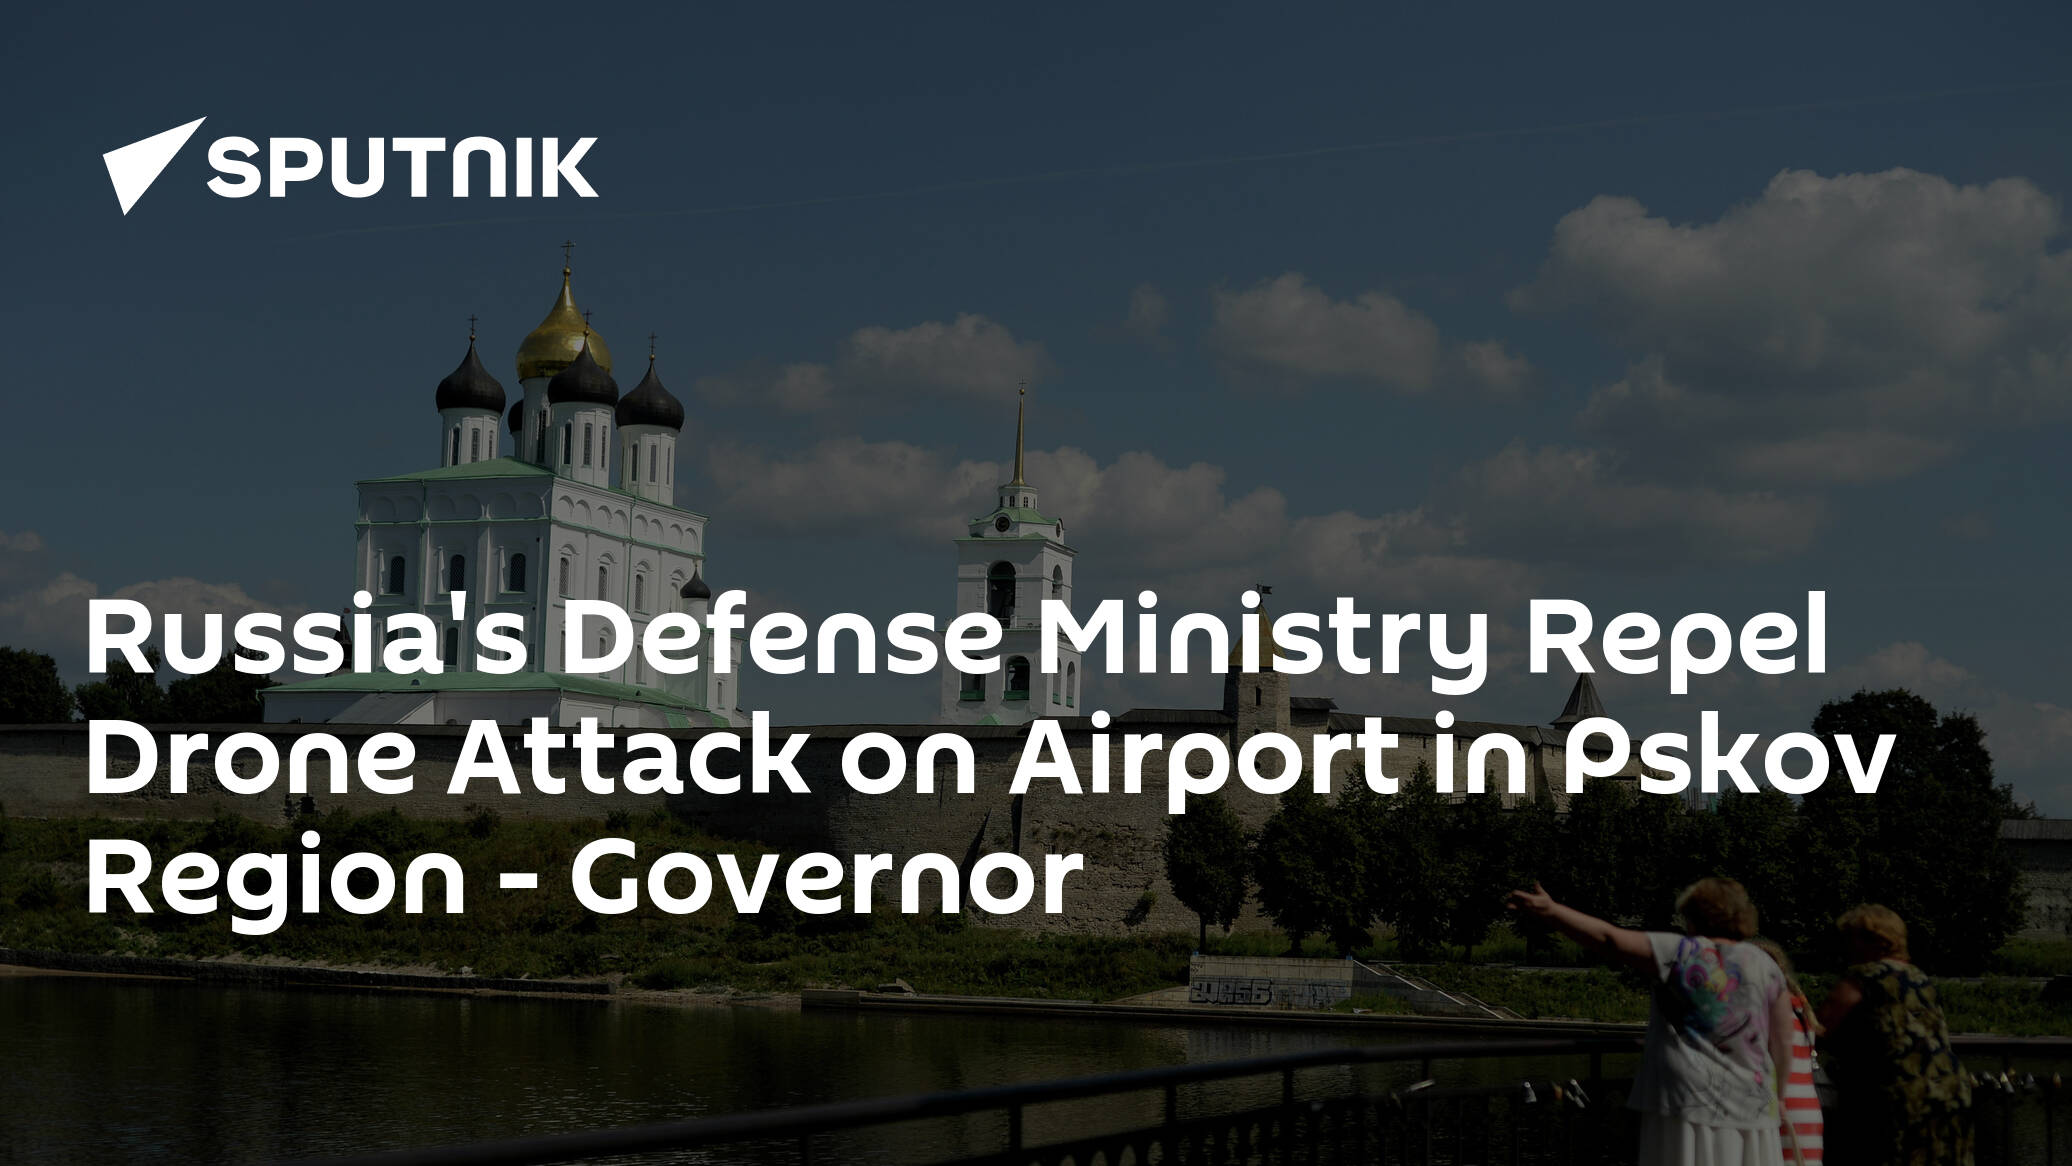 Russia's Defense Ministry Repelling Drone Attack on Airport in Pskov Region – Governor